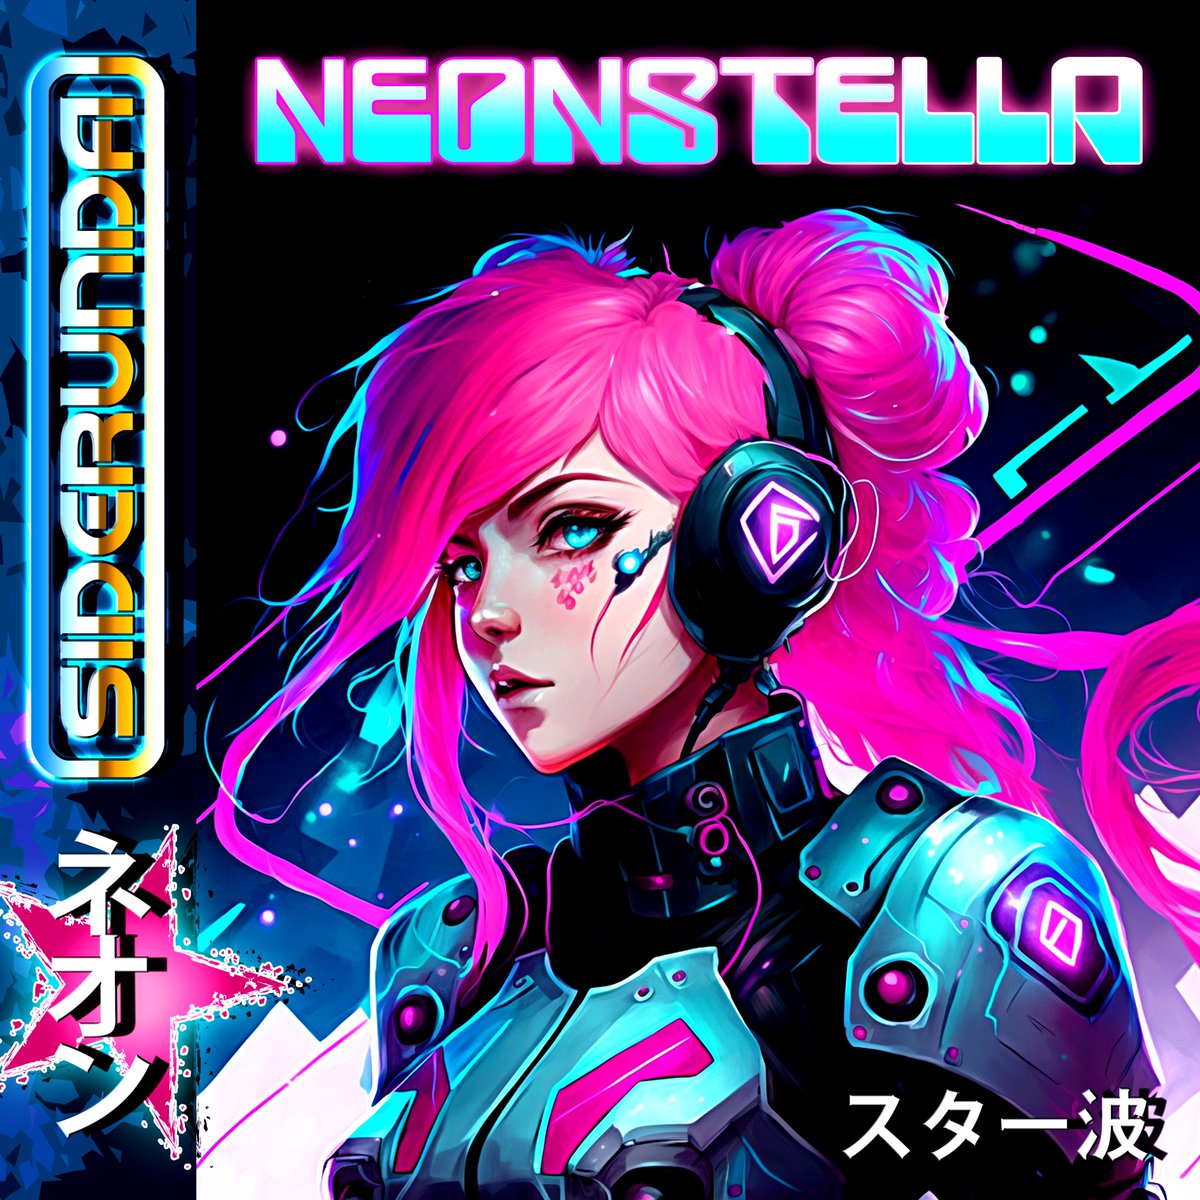 NEONSTELLA by @siderunda SUPERCOOL #retrowave #synthwave #vaporwave #cyberpunk #synth #synthpop #electronicmusic #music #synthesizer #retro #newwave #outrun LISTEN and SUPPORT here: linktr.ee/siderunda